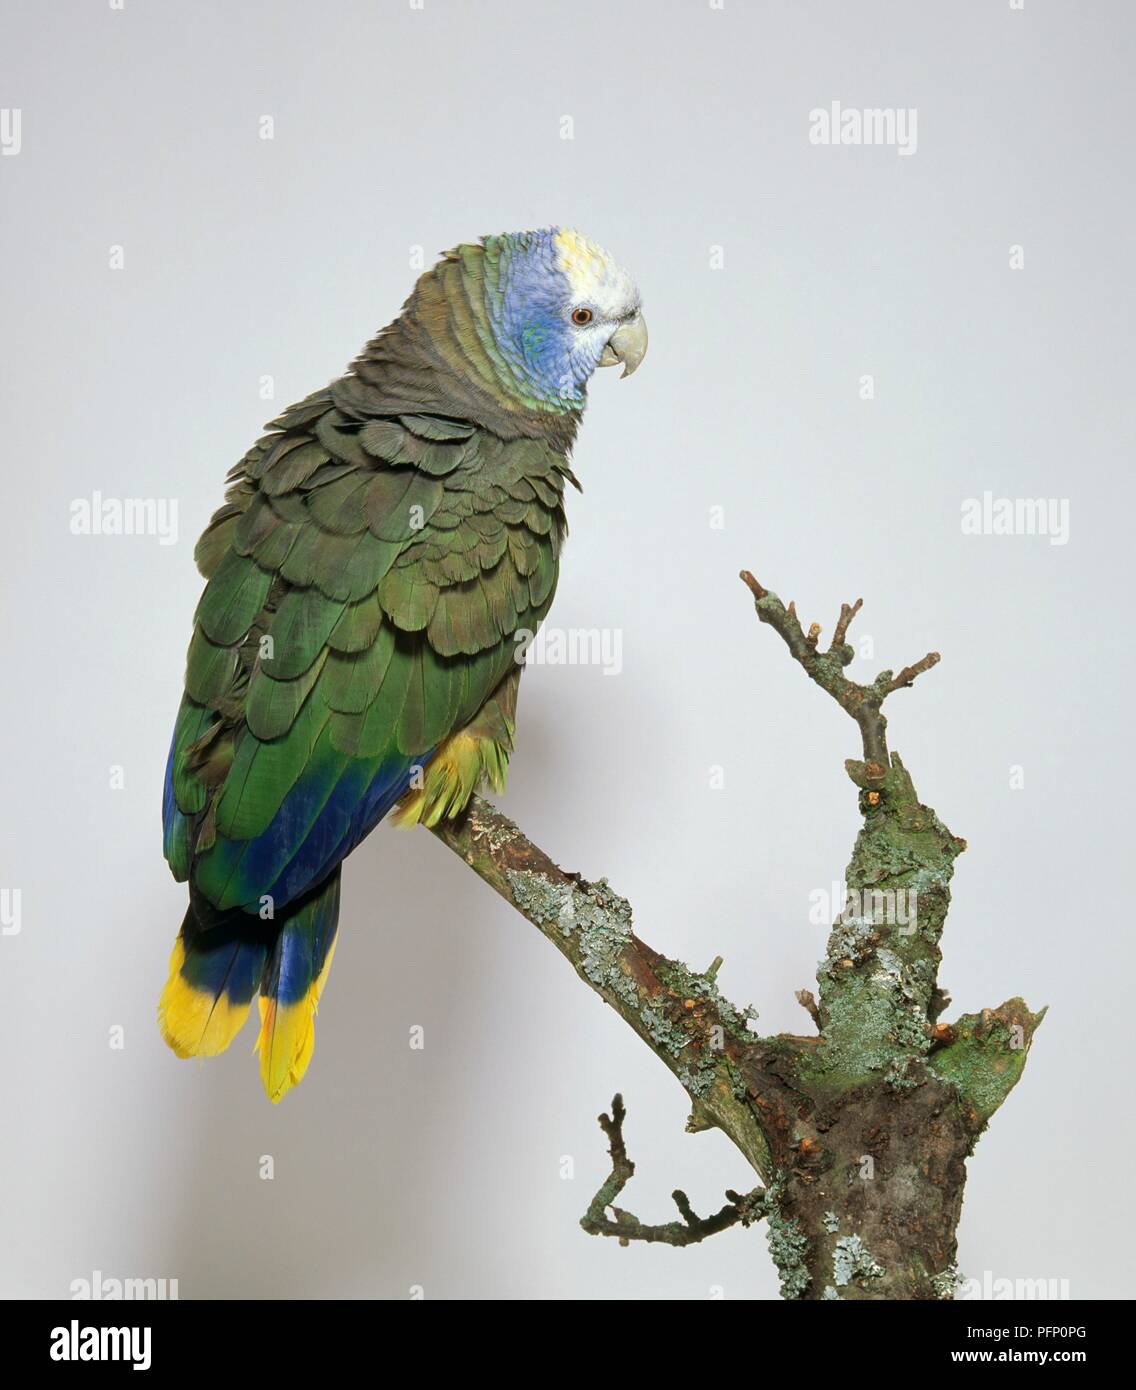 St Vincent parrot (Amazona guildingii) on a branch, side and rear view Stock Photo